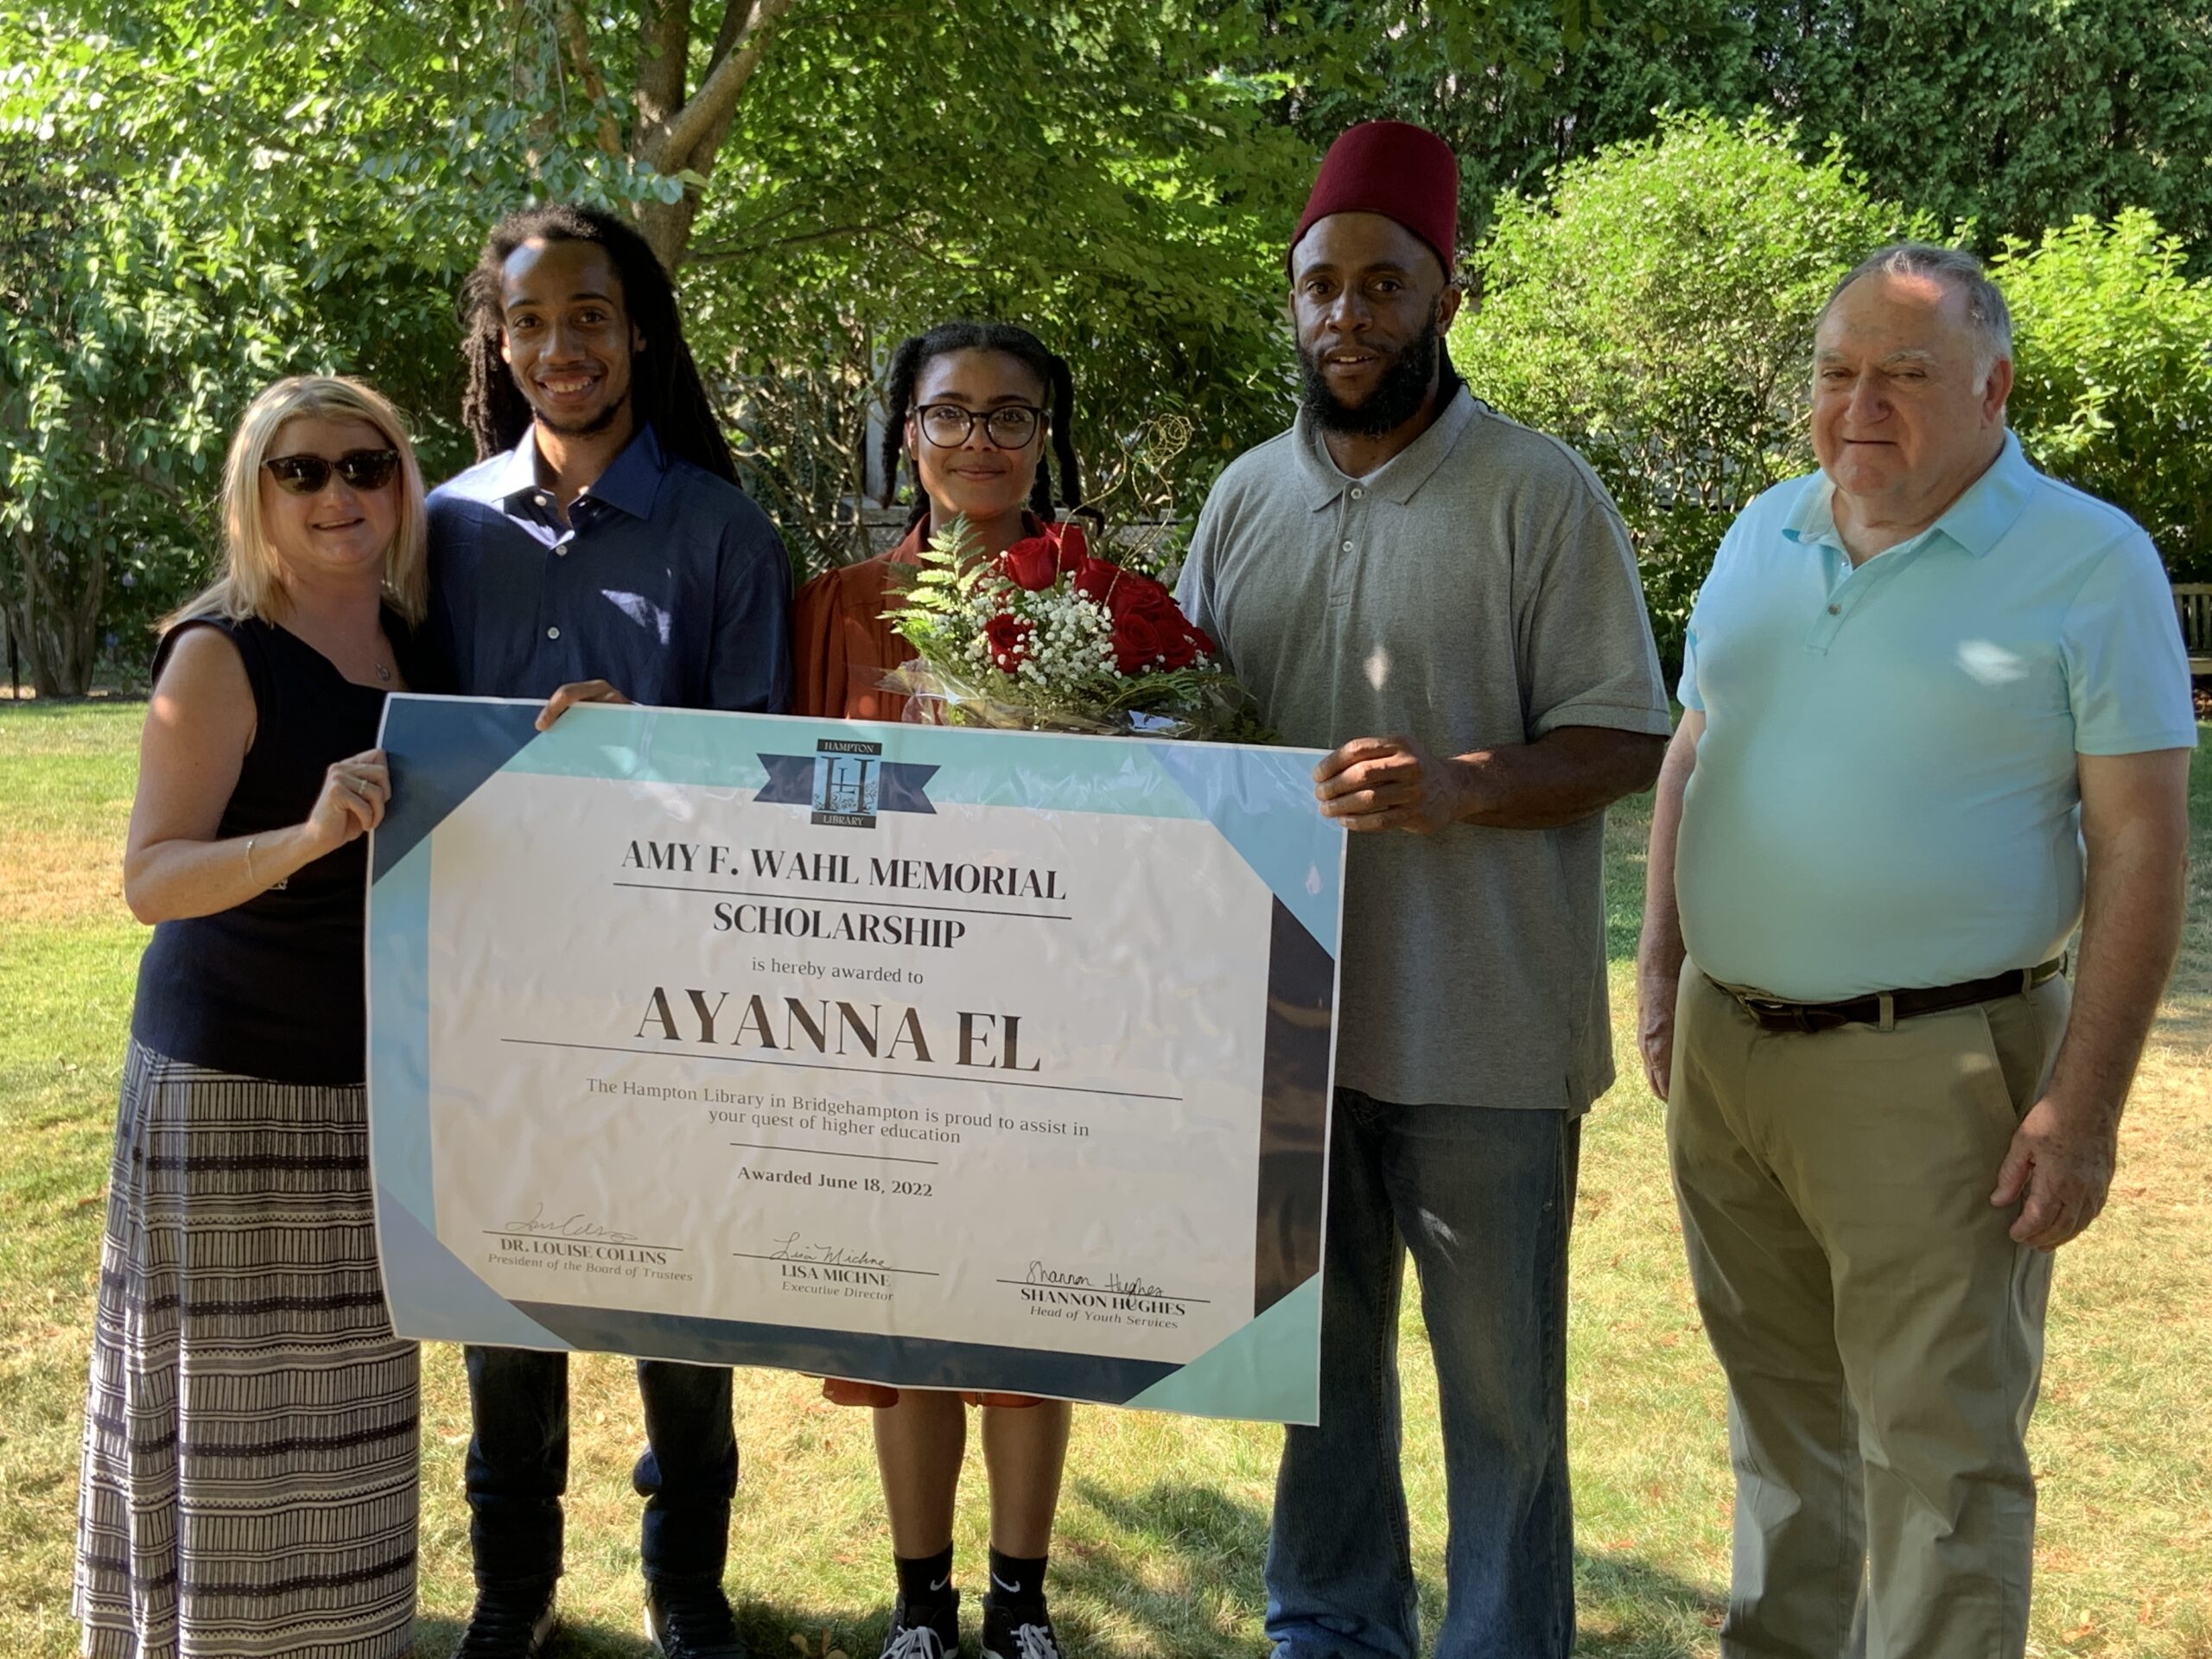 Ayanna El, the winner of the Amy F. Wahl Memorial Scholarship, is flanked by her brother Ameer El, left, and father, Muslim El, as well as Wahl's sister, Heather DeSanto, far left, and Wahl's father, Bill Wahl, right, at a reception at the Hampton Library on July 20. STEPHEN J. KOTZ